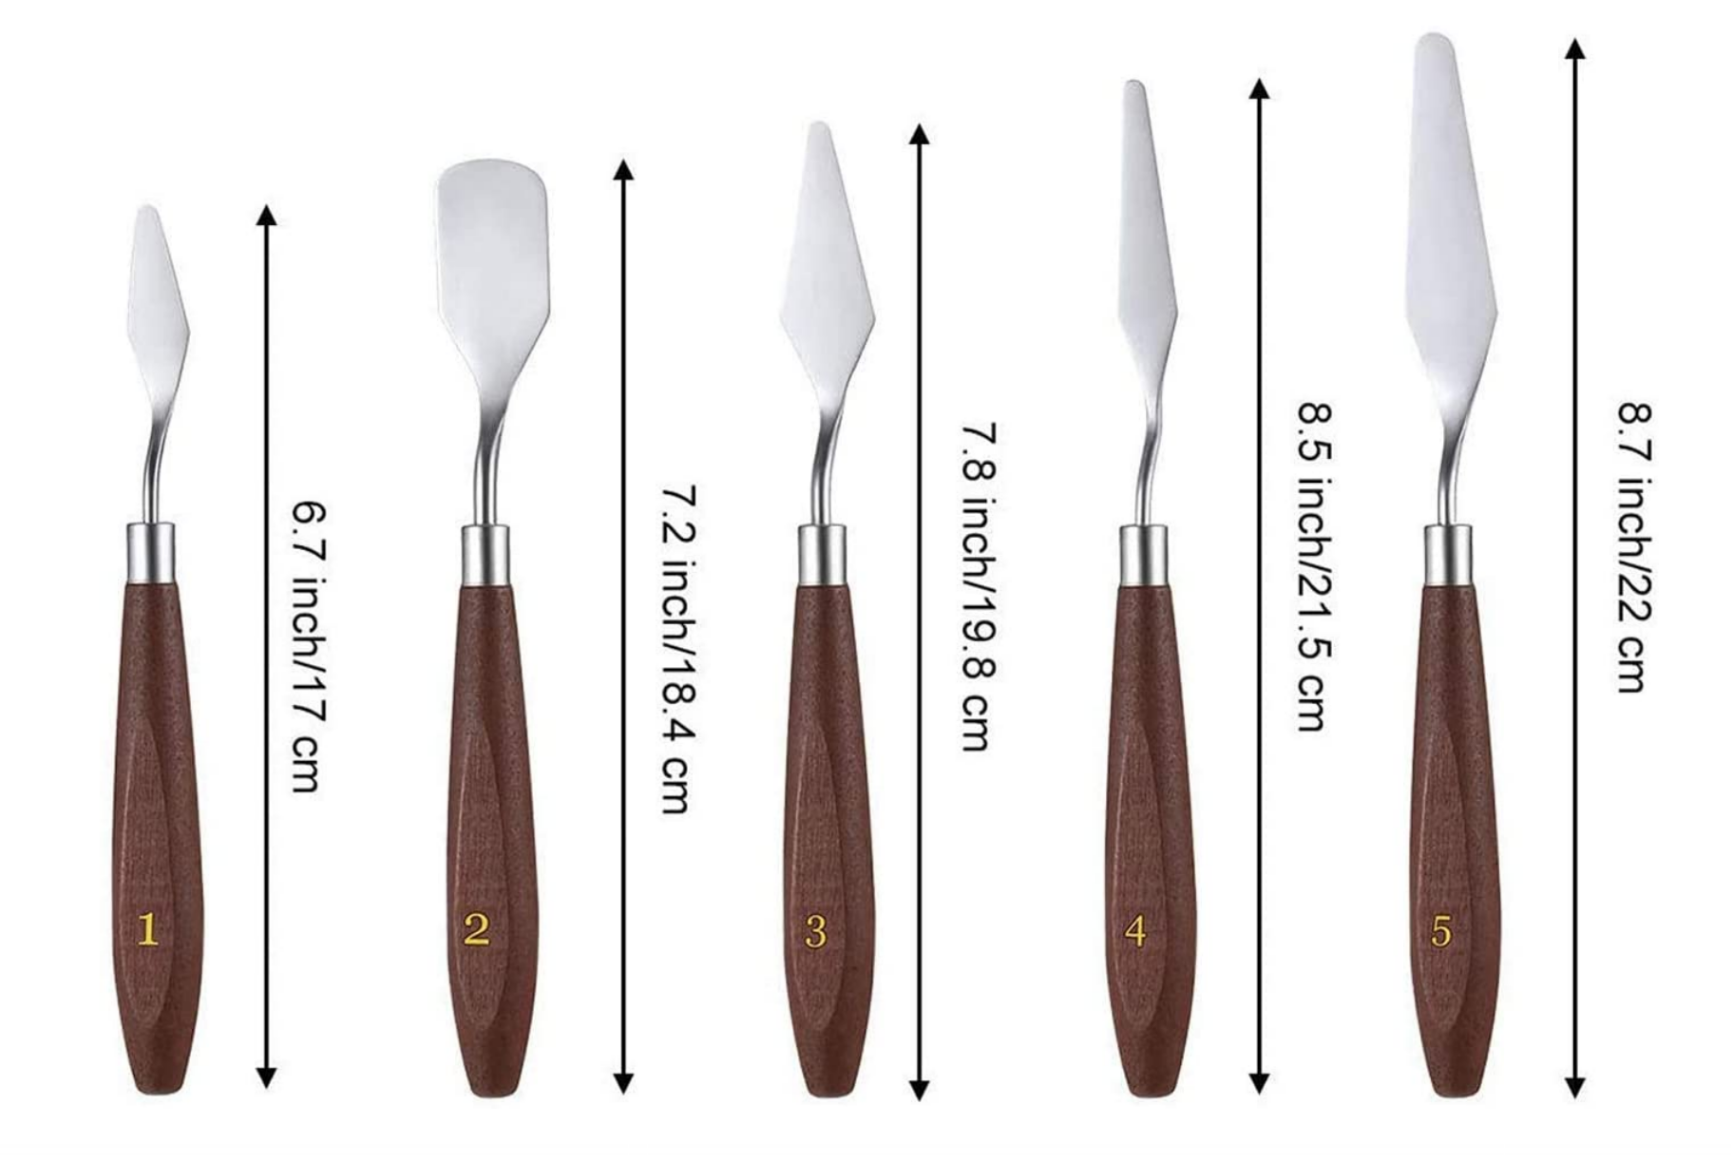 7 Pieces Painting Knife Set Spatula Palette Knife Stainless Steel Painting  Mixing Scraper Oil Painting Accessories with Wood Handle for Art and Paint